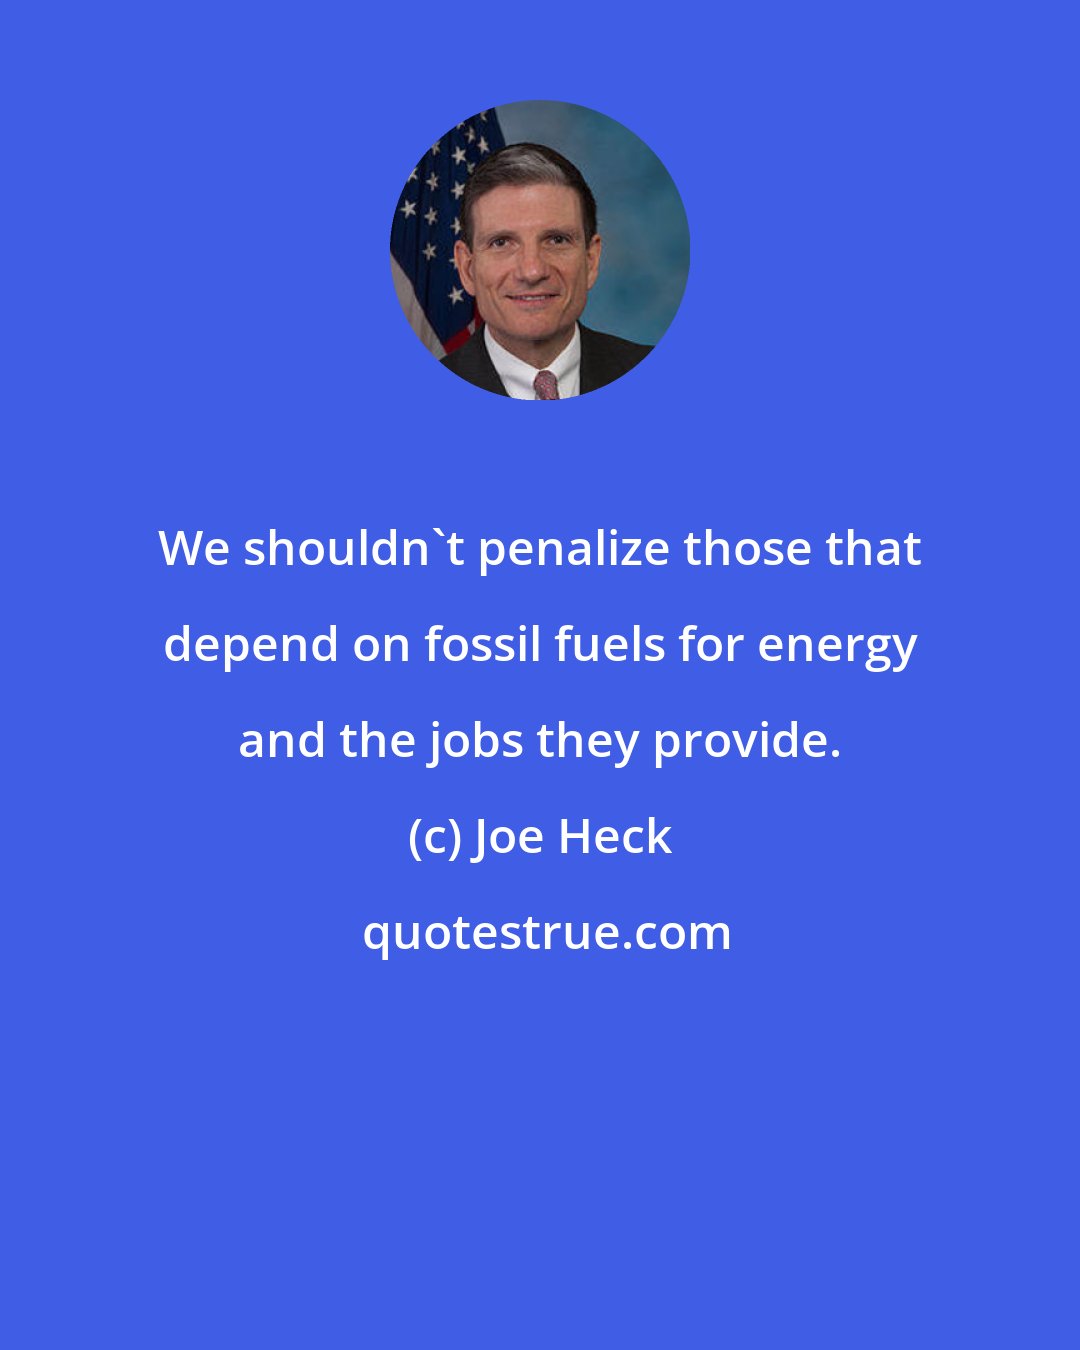 Joe Heck: We shouldn't penalize those that depend on fossil fuels for energy and the jobs they provide.